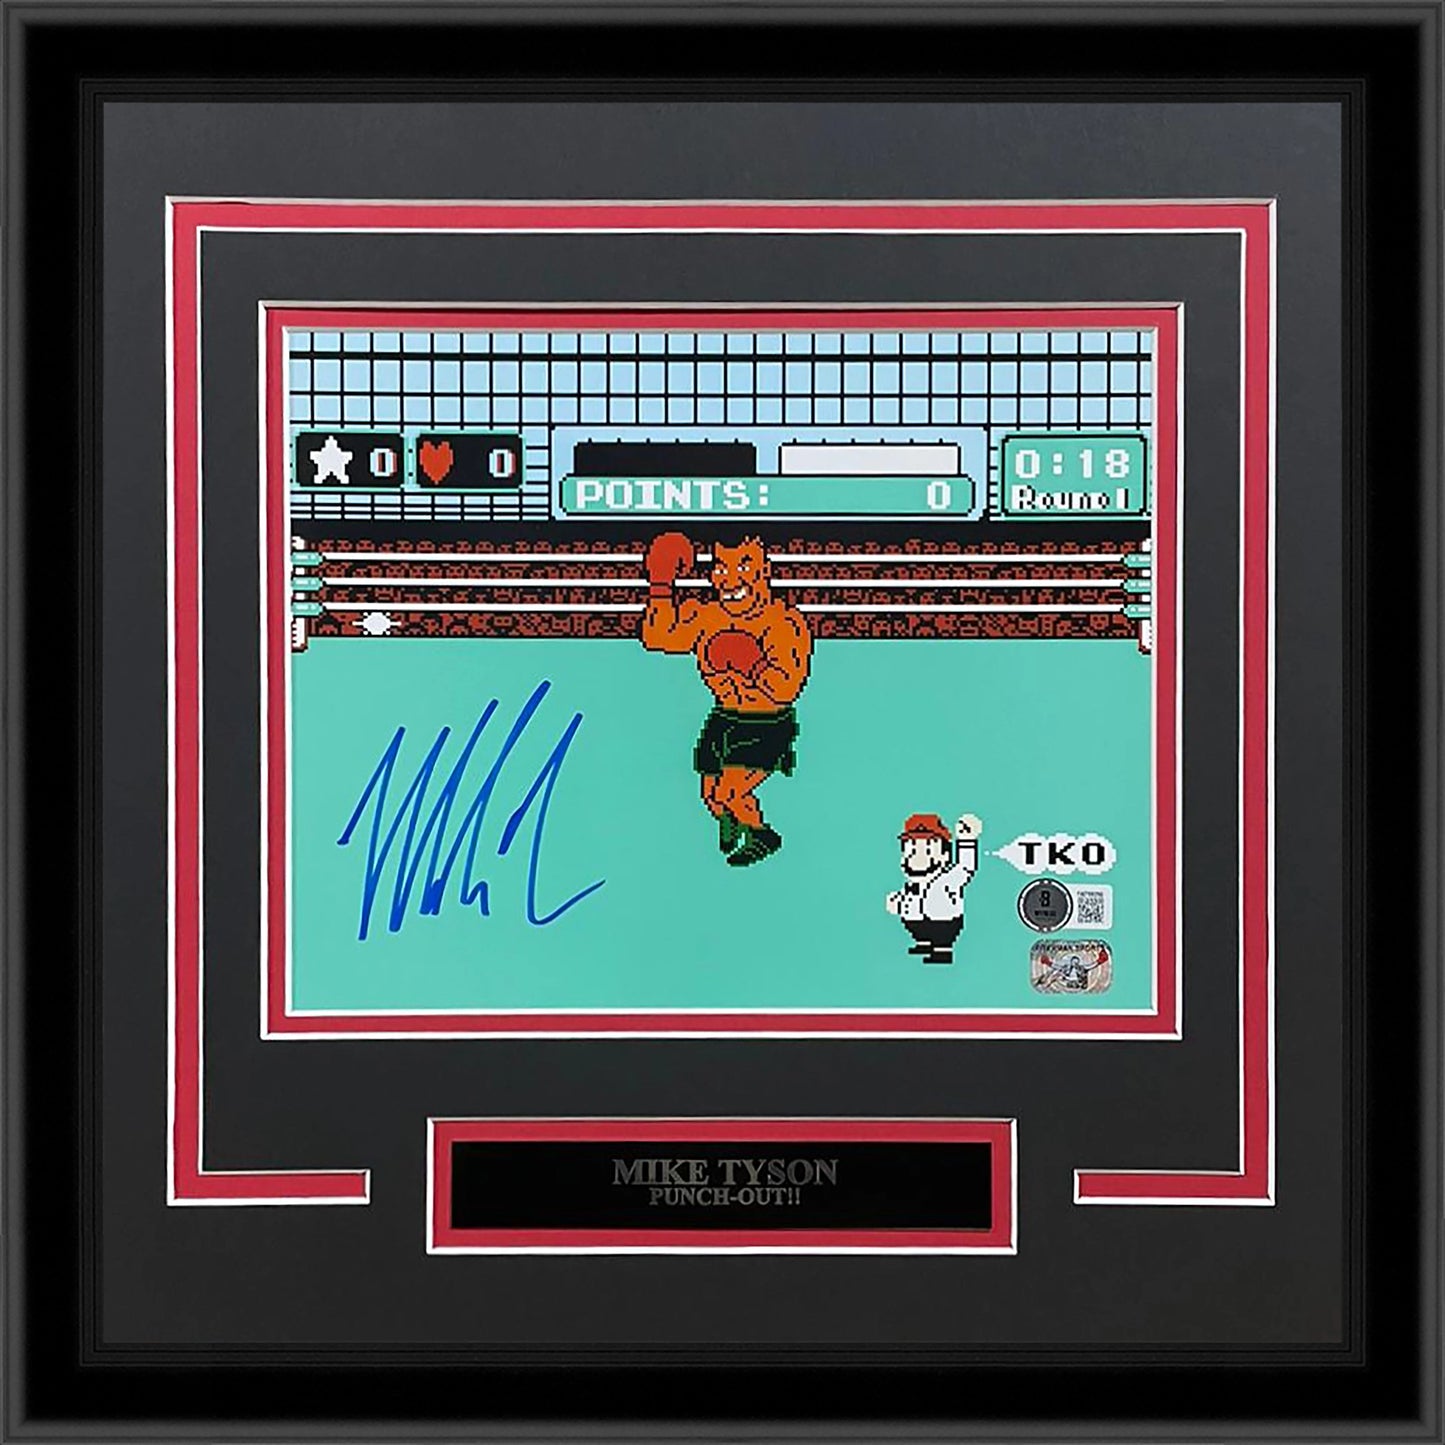 Mike Tyson Autographed Boxing (Nintendo Punchout) Deluxe Framed 8x10 Photo w/ Nameplate - Tyson Holo